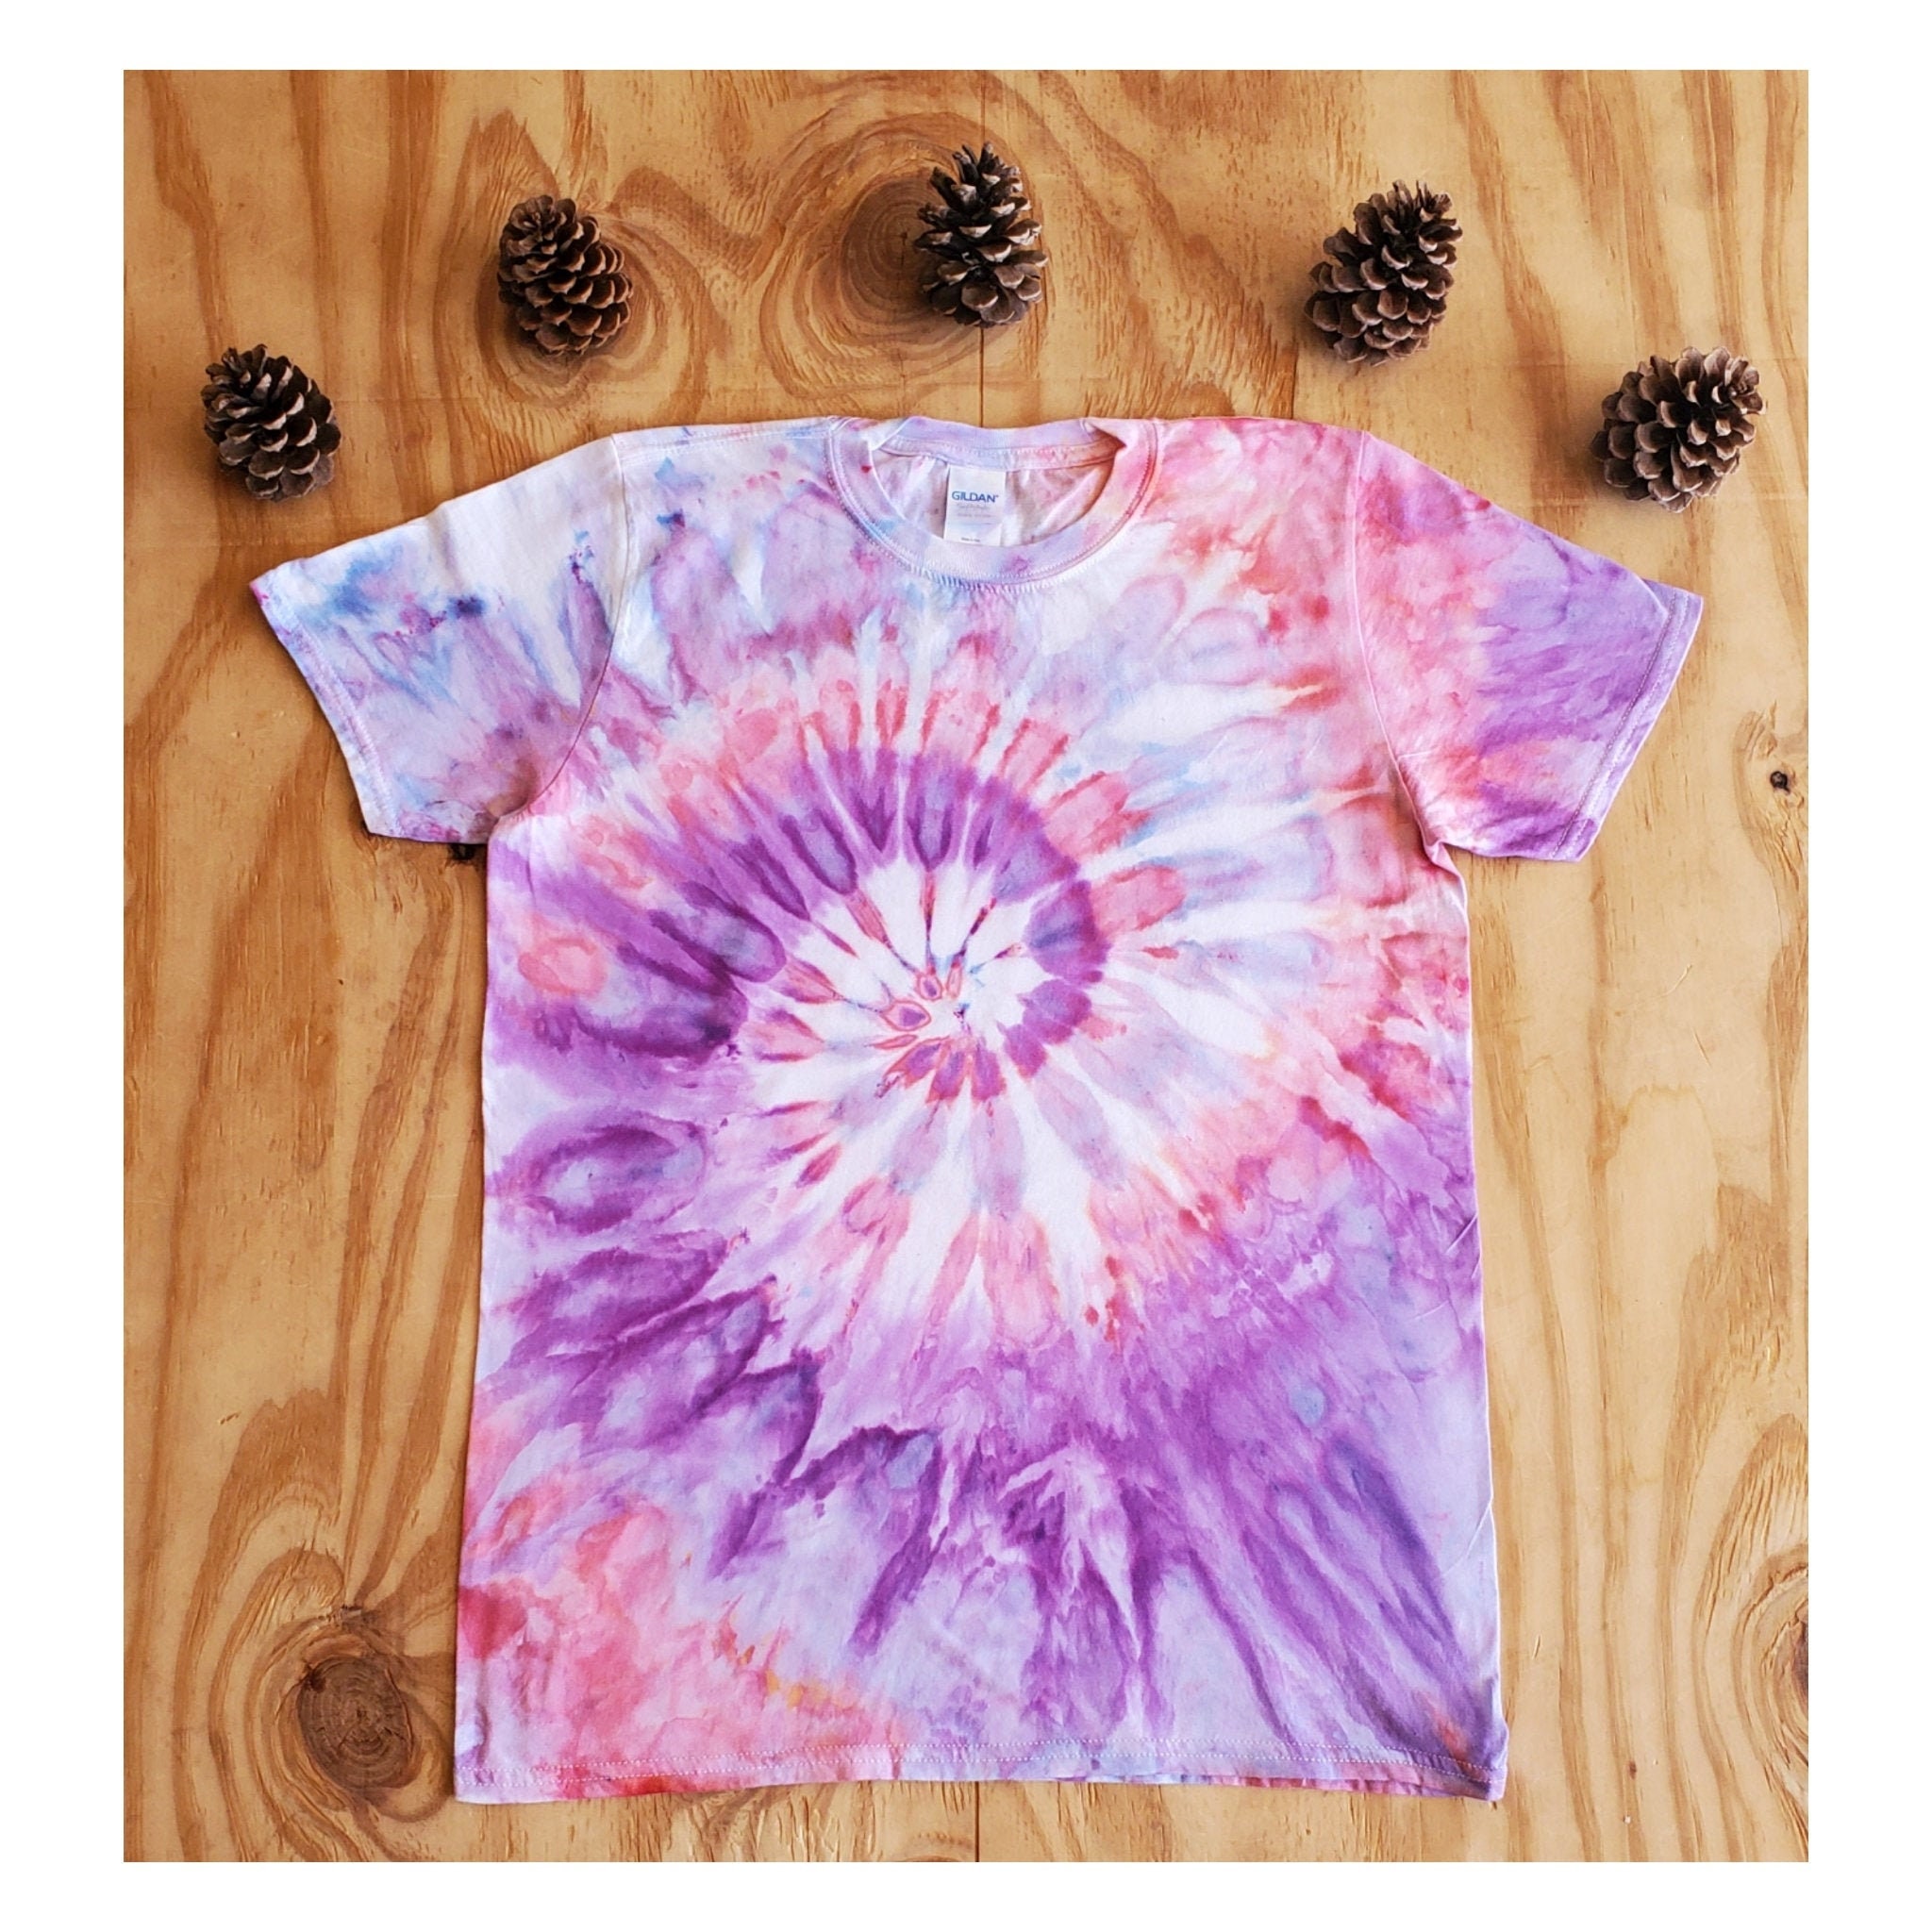 How to Use Soda Ash for Tie-Dye - Sarah Maker